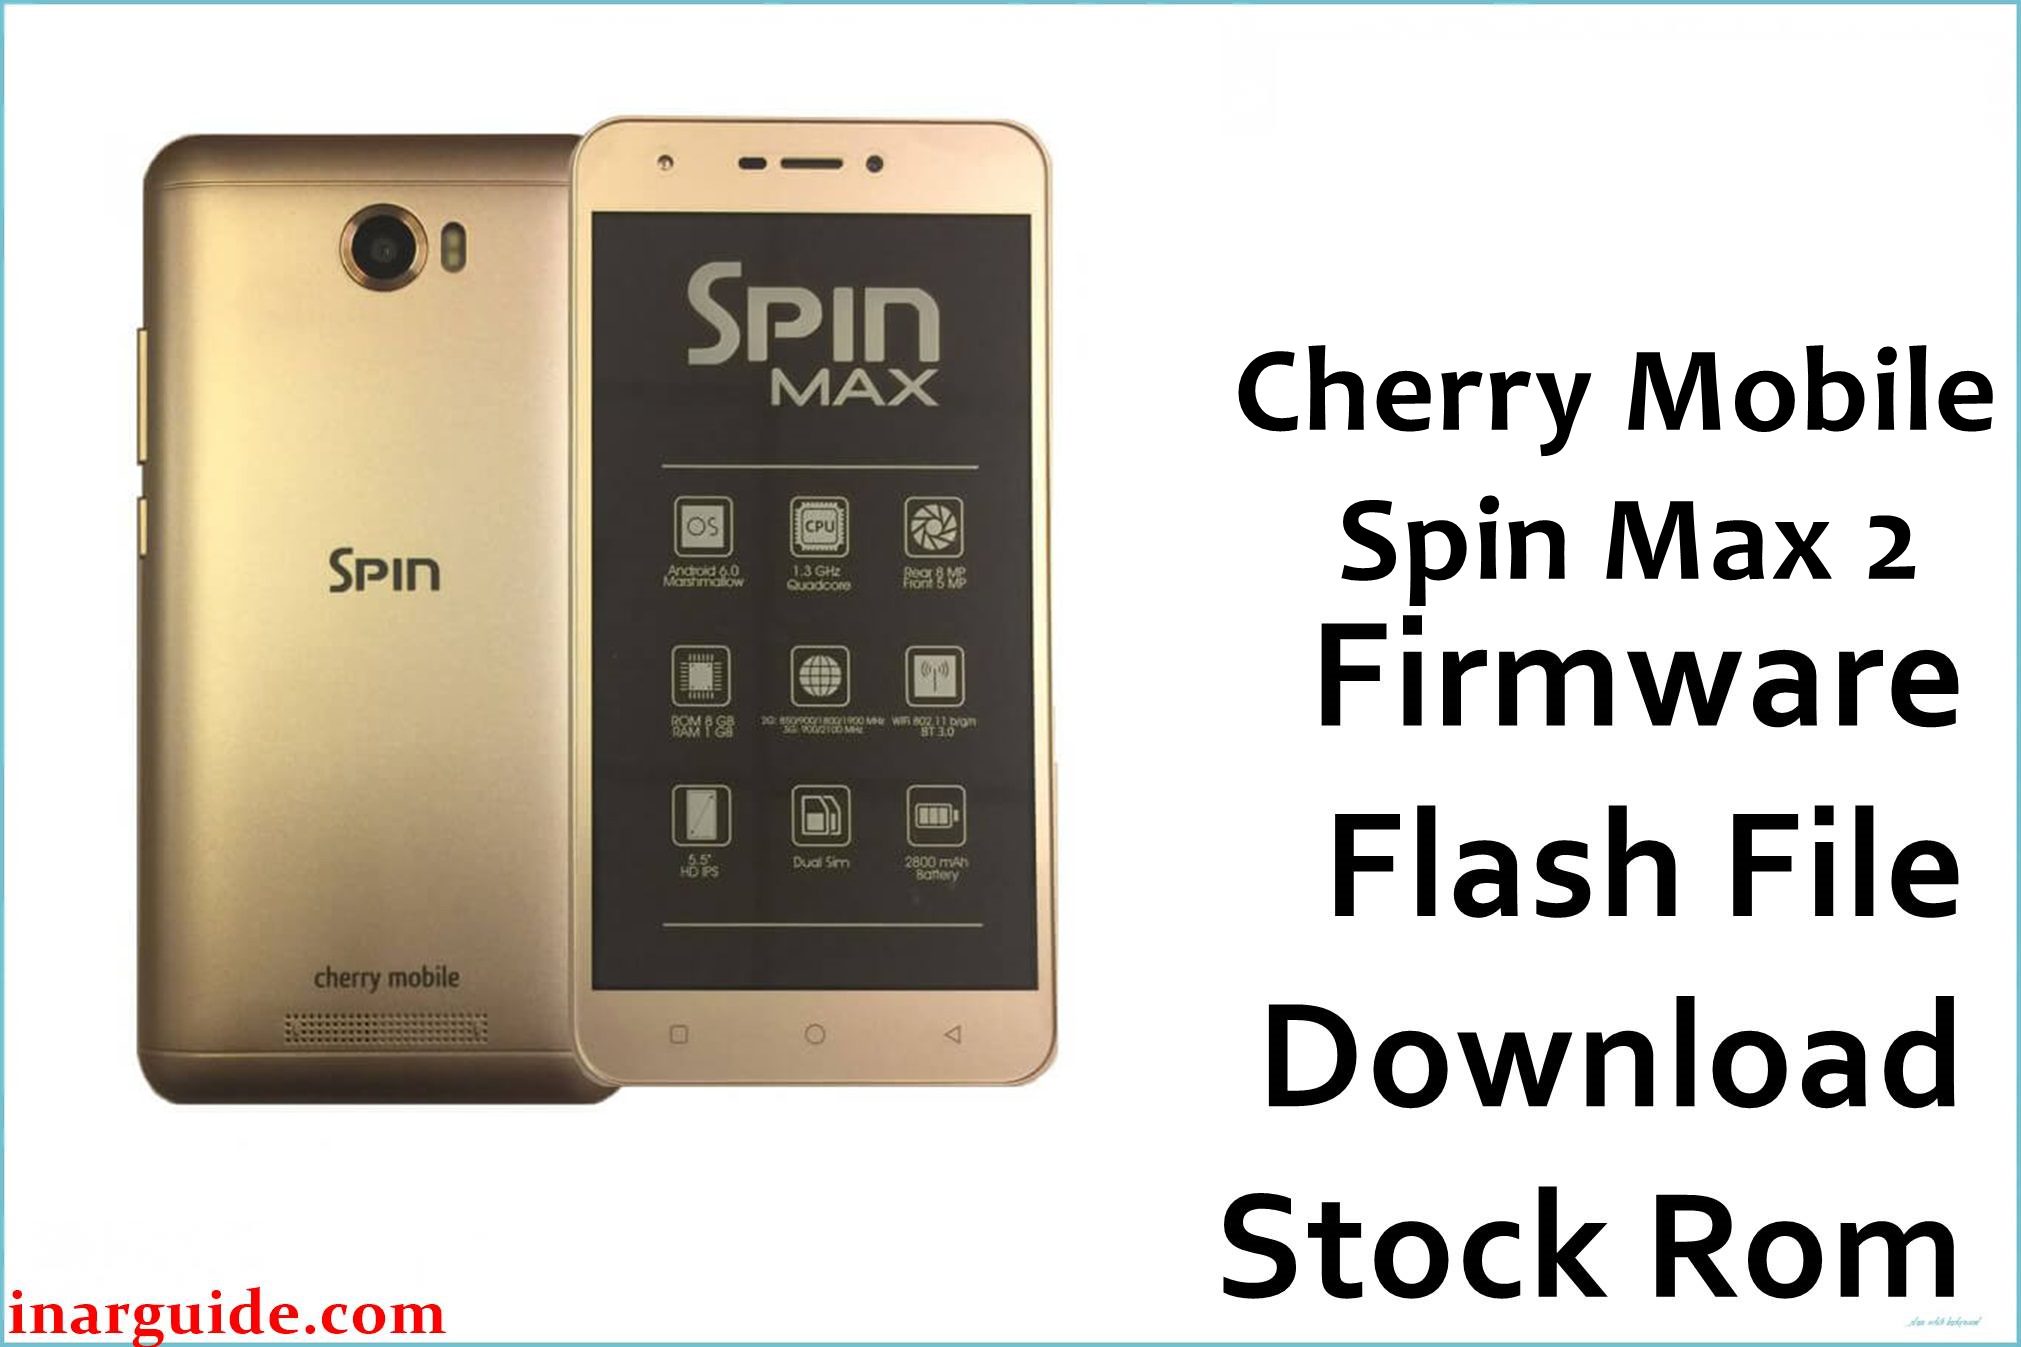 Cherry Mobile Spin Max 2